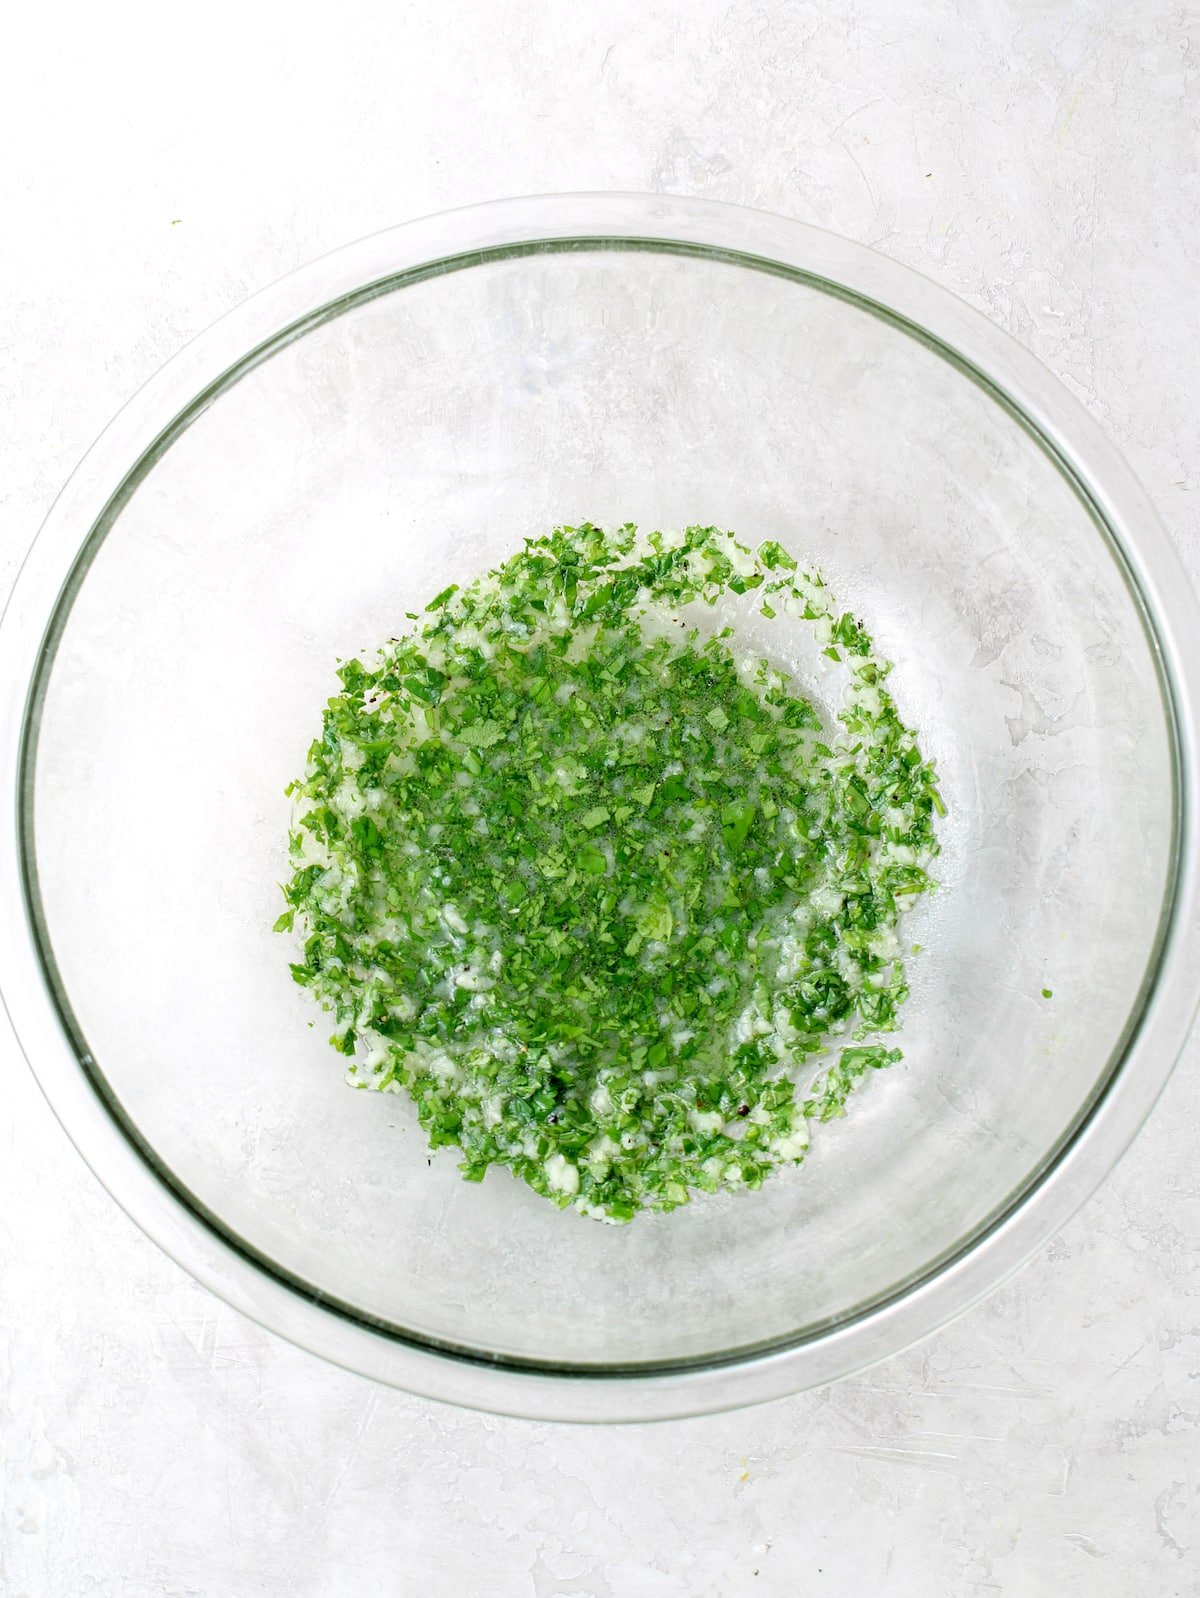 Cilantro lime marinade in a glass bowl.